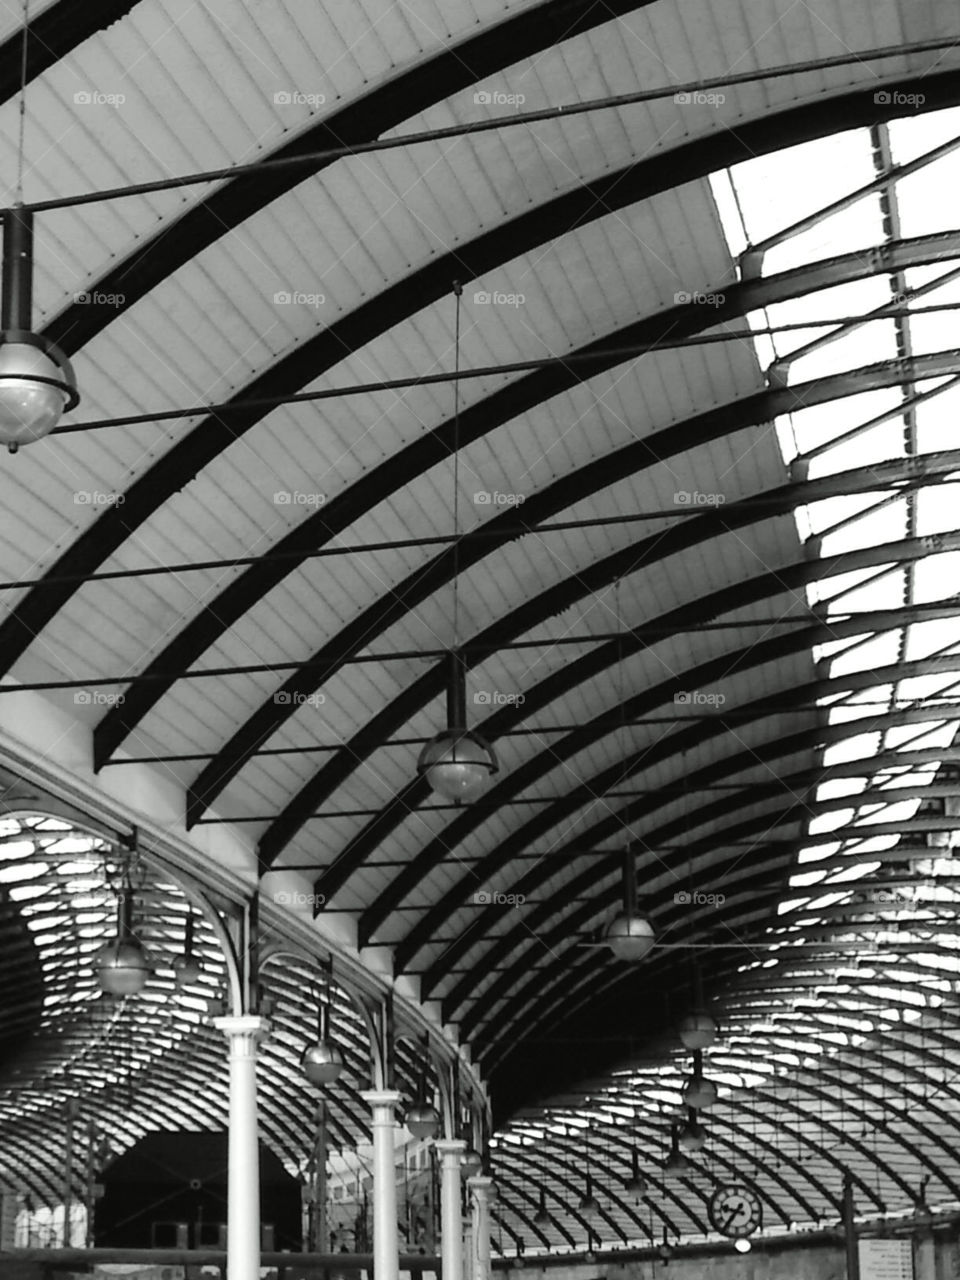 roof newcastle train station geometric by cgmp